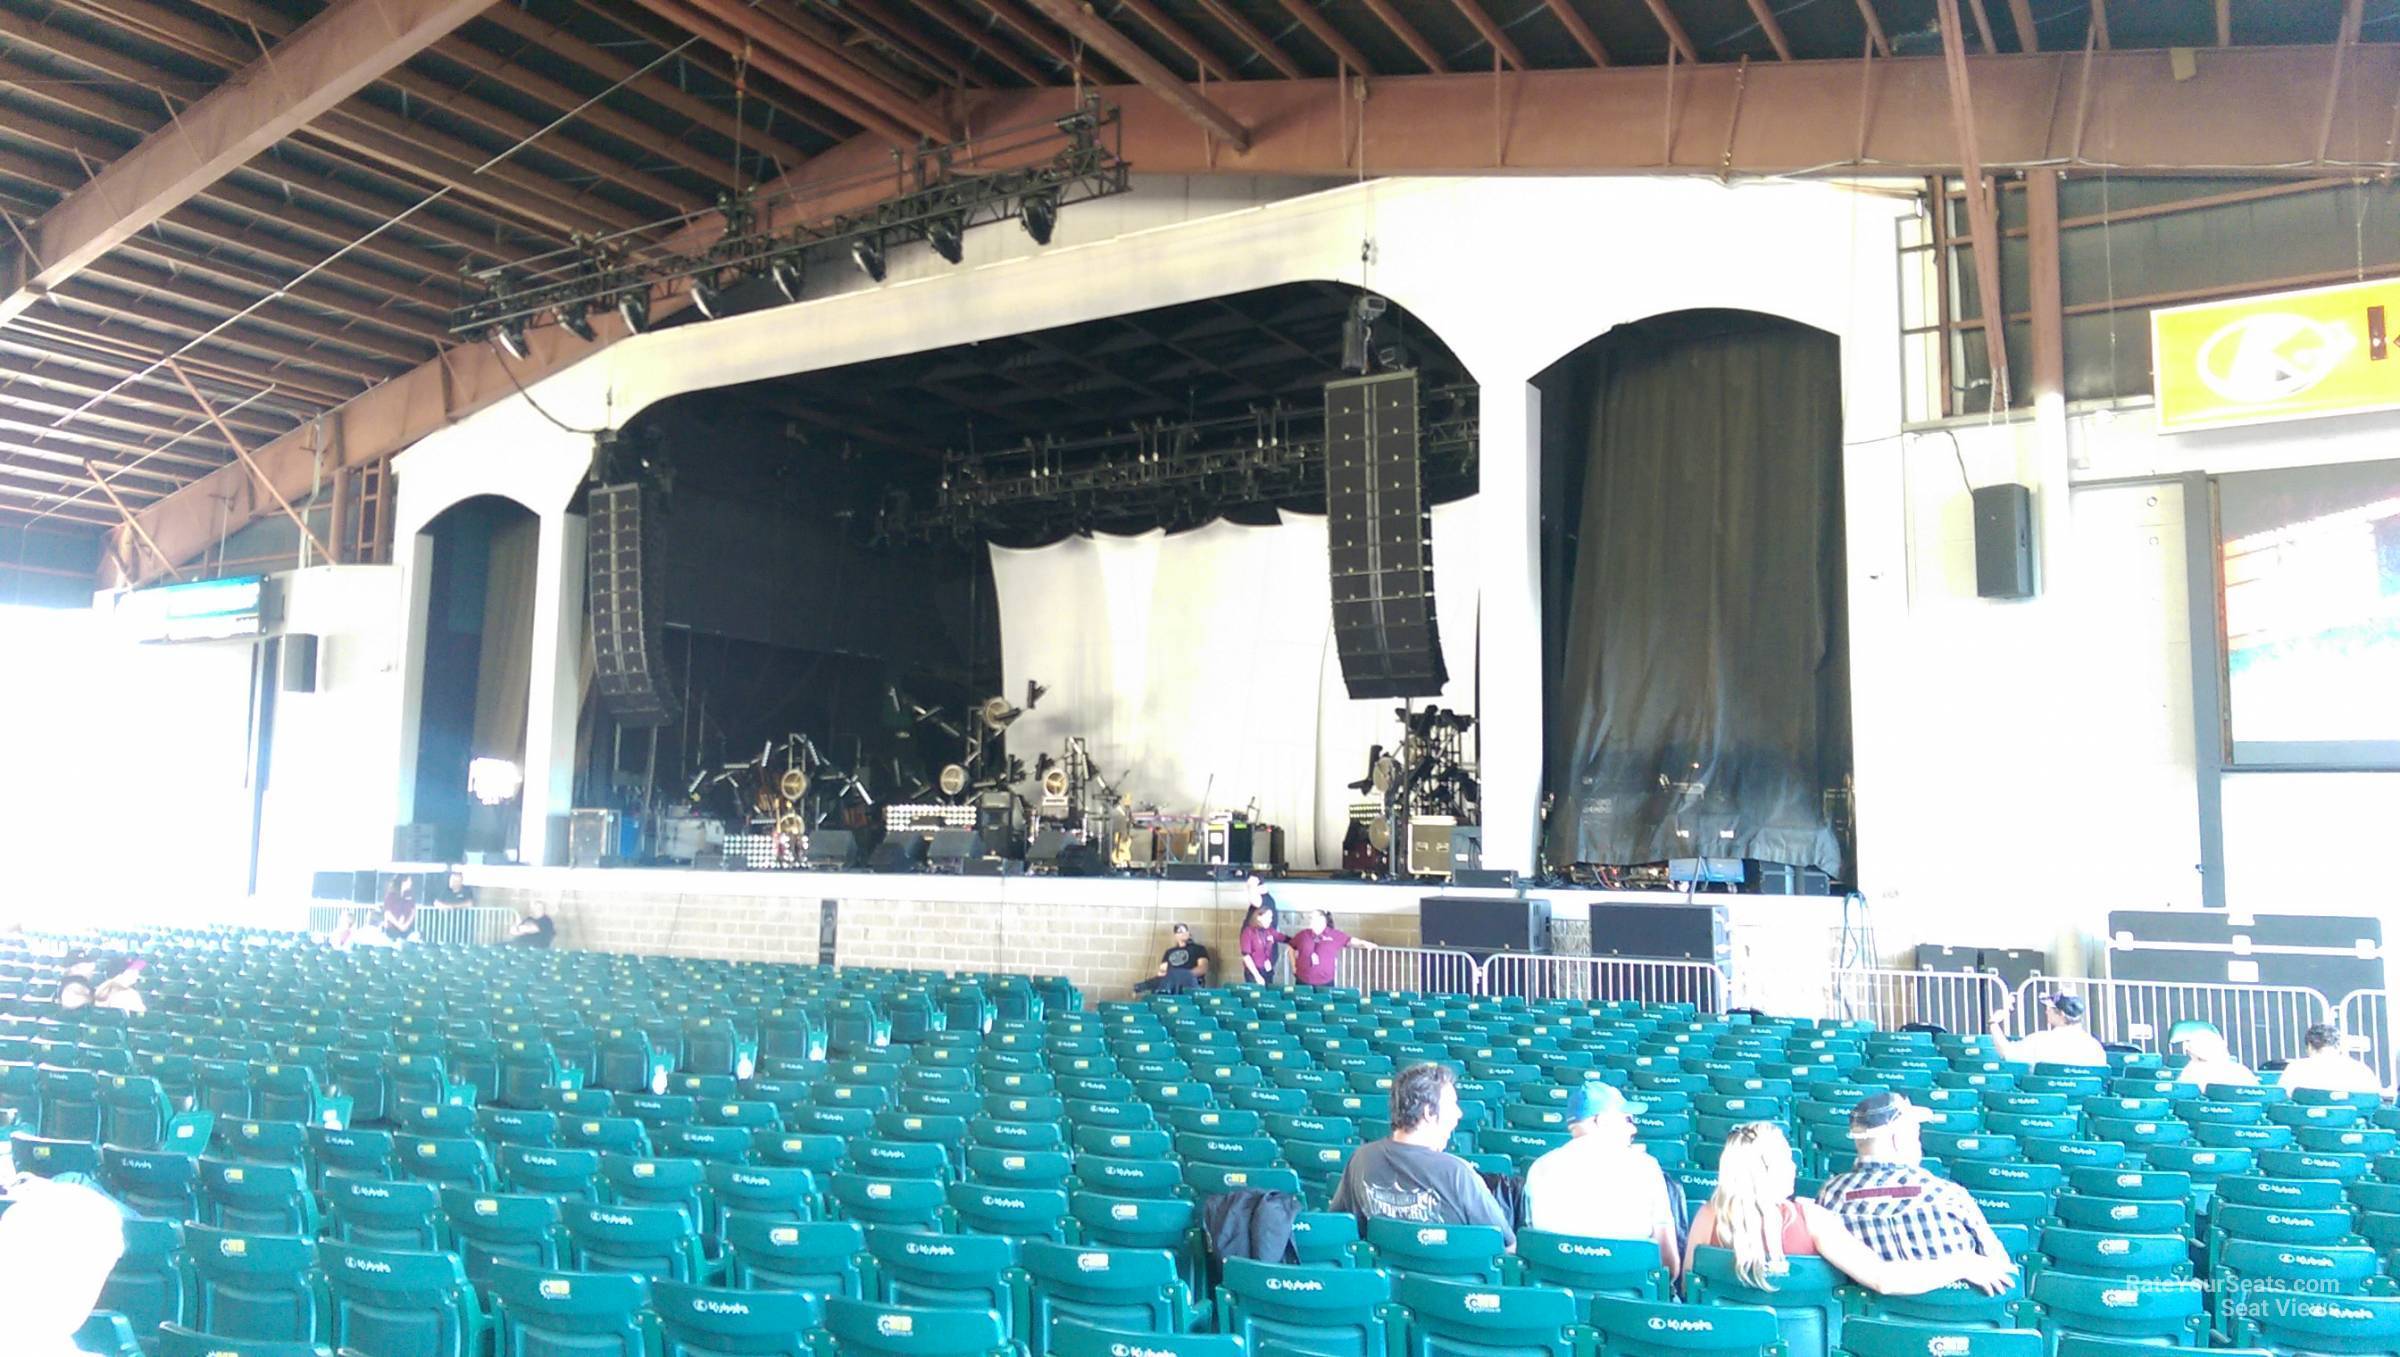 section 1c, row 20 seat view  - bank of new hampshire pavilion